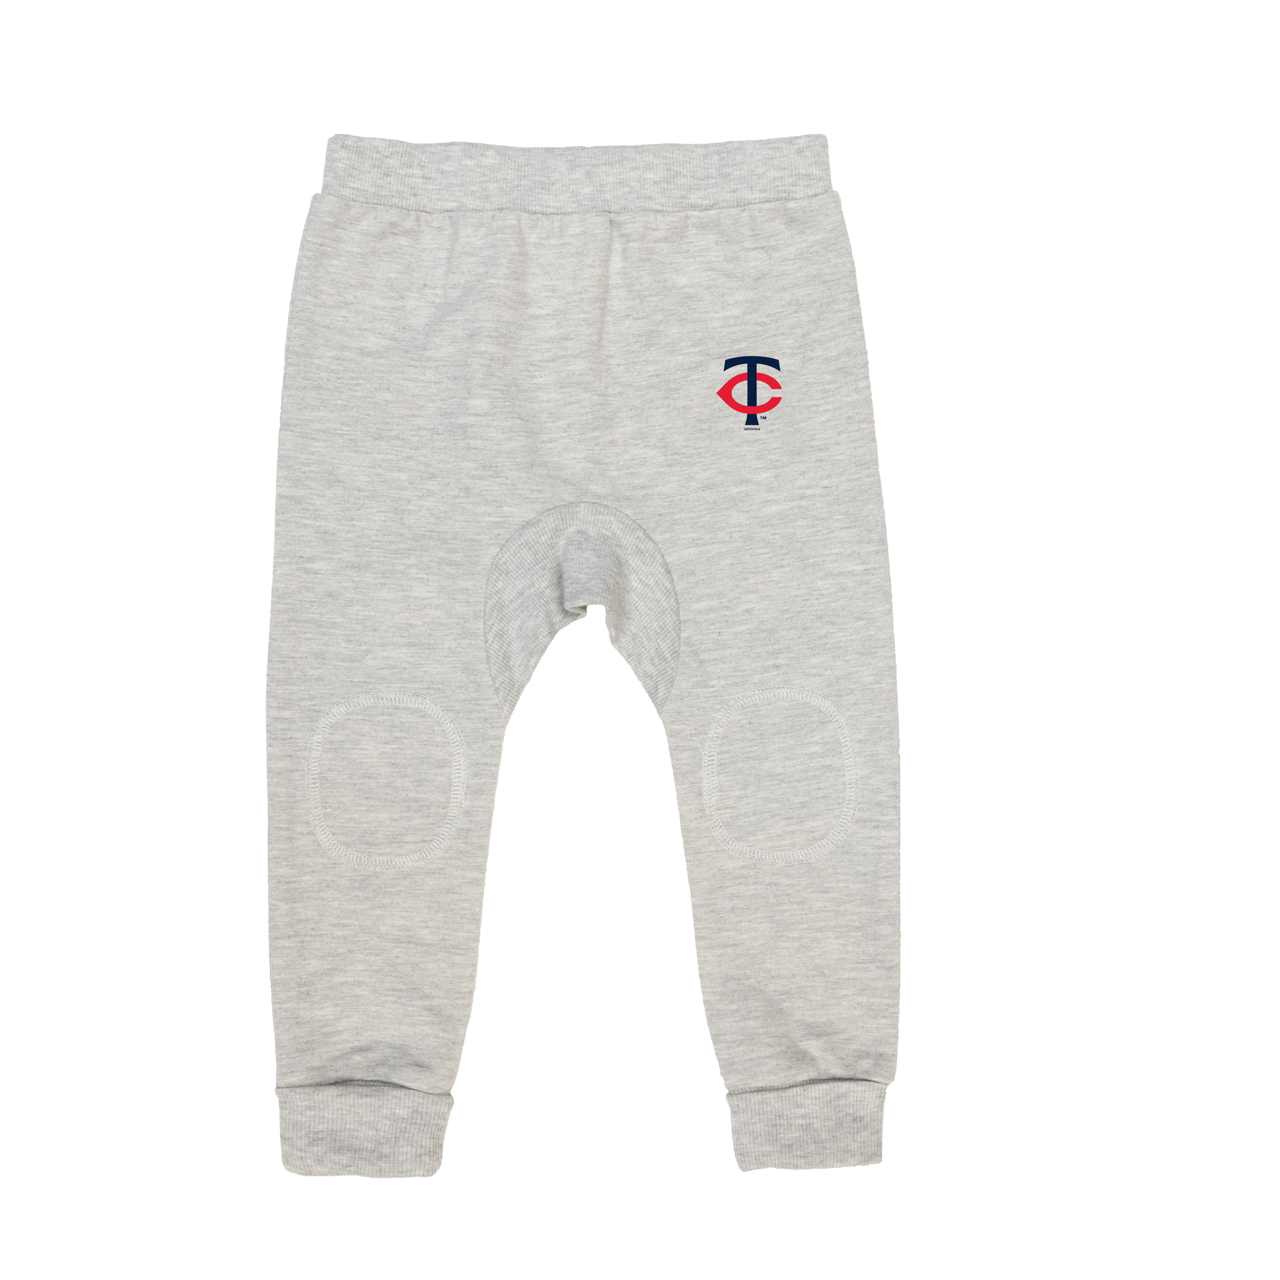 MLB Unisex Baby French Terry Cotton Track Pants